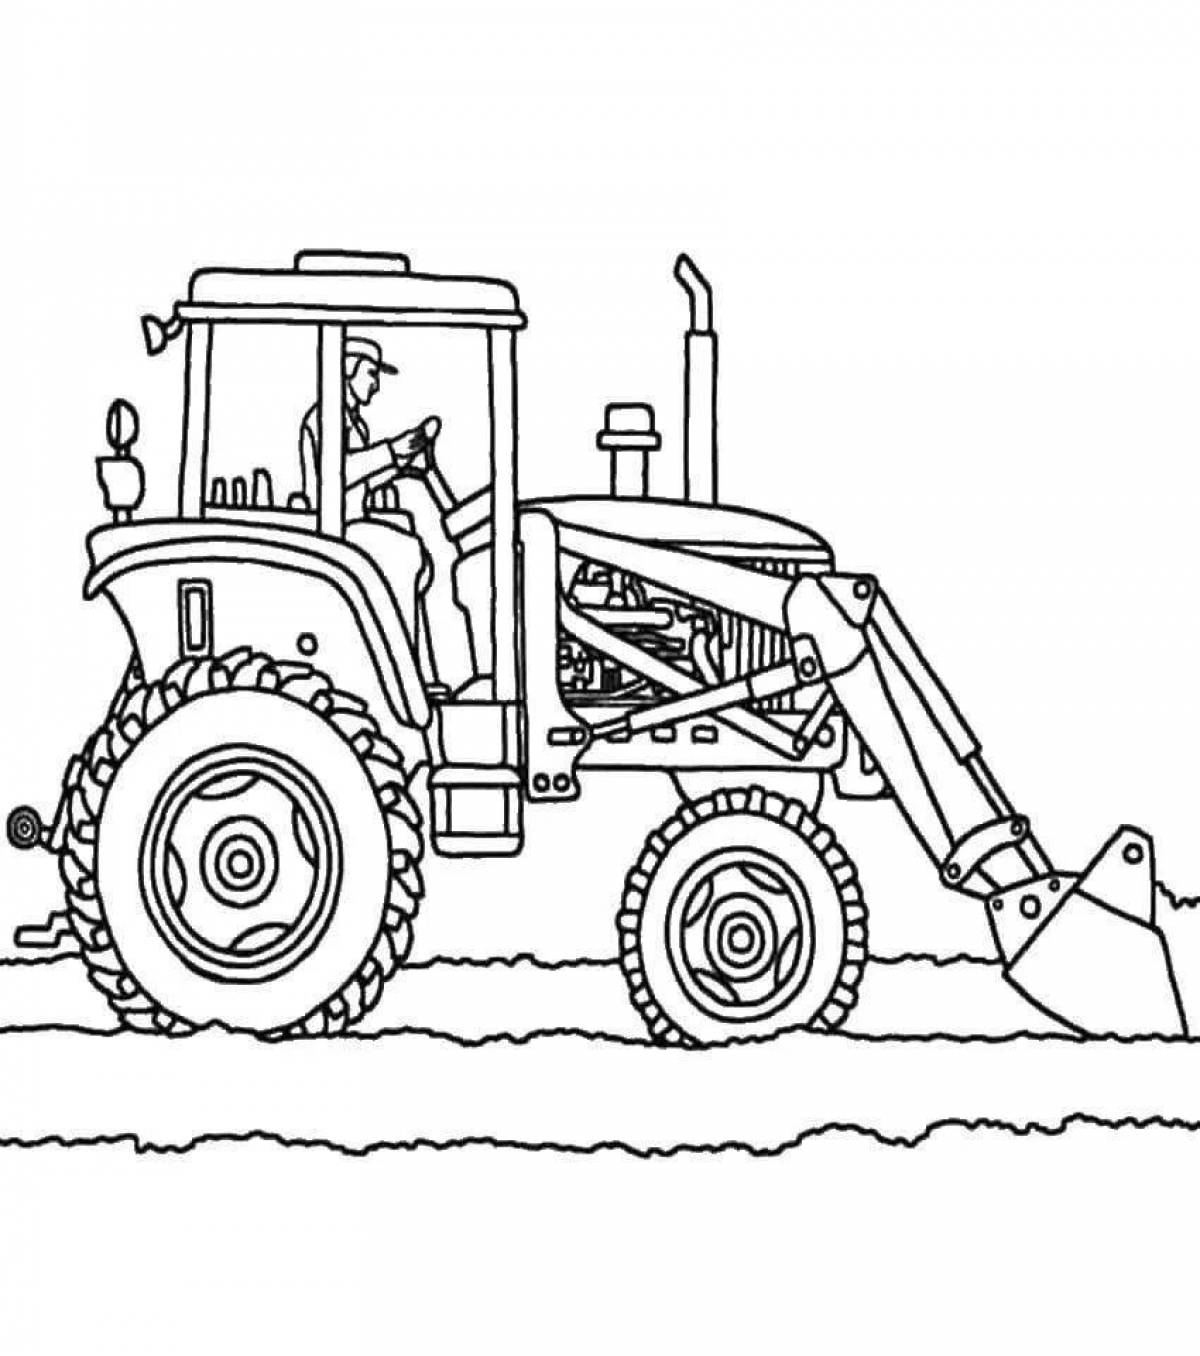 Incredible tractor coloring book